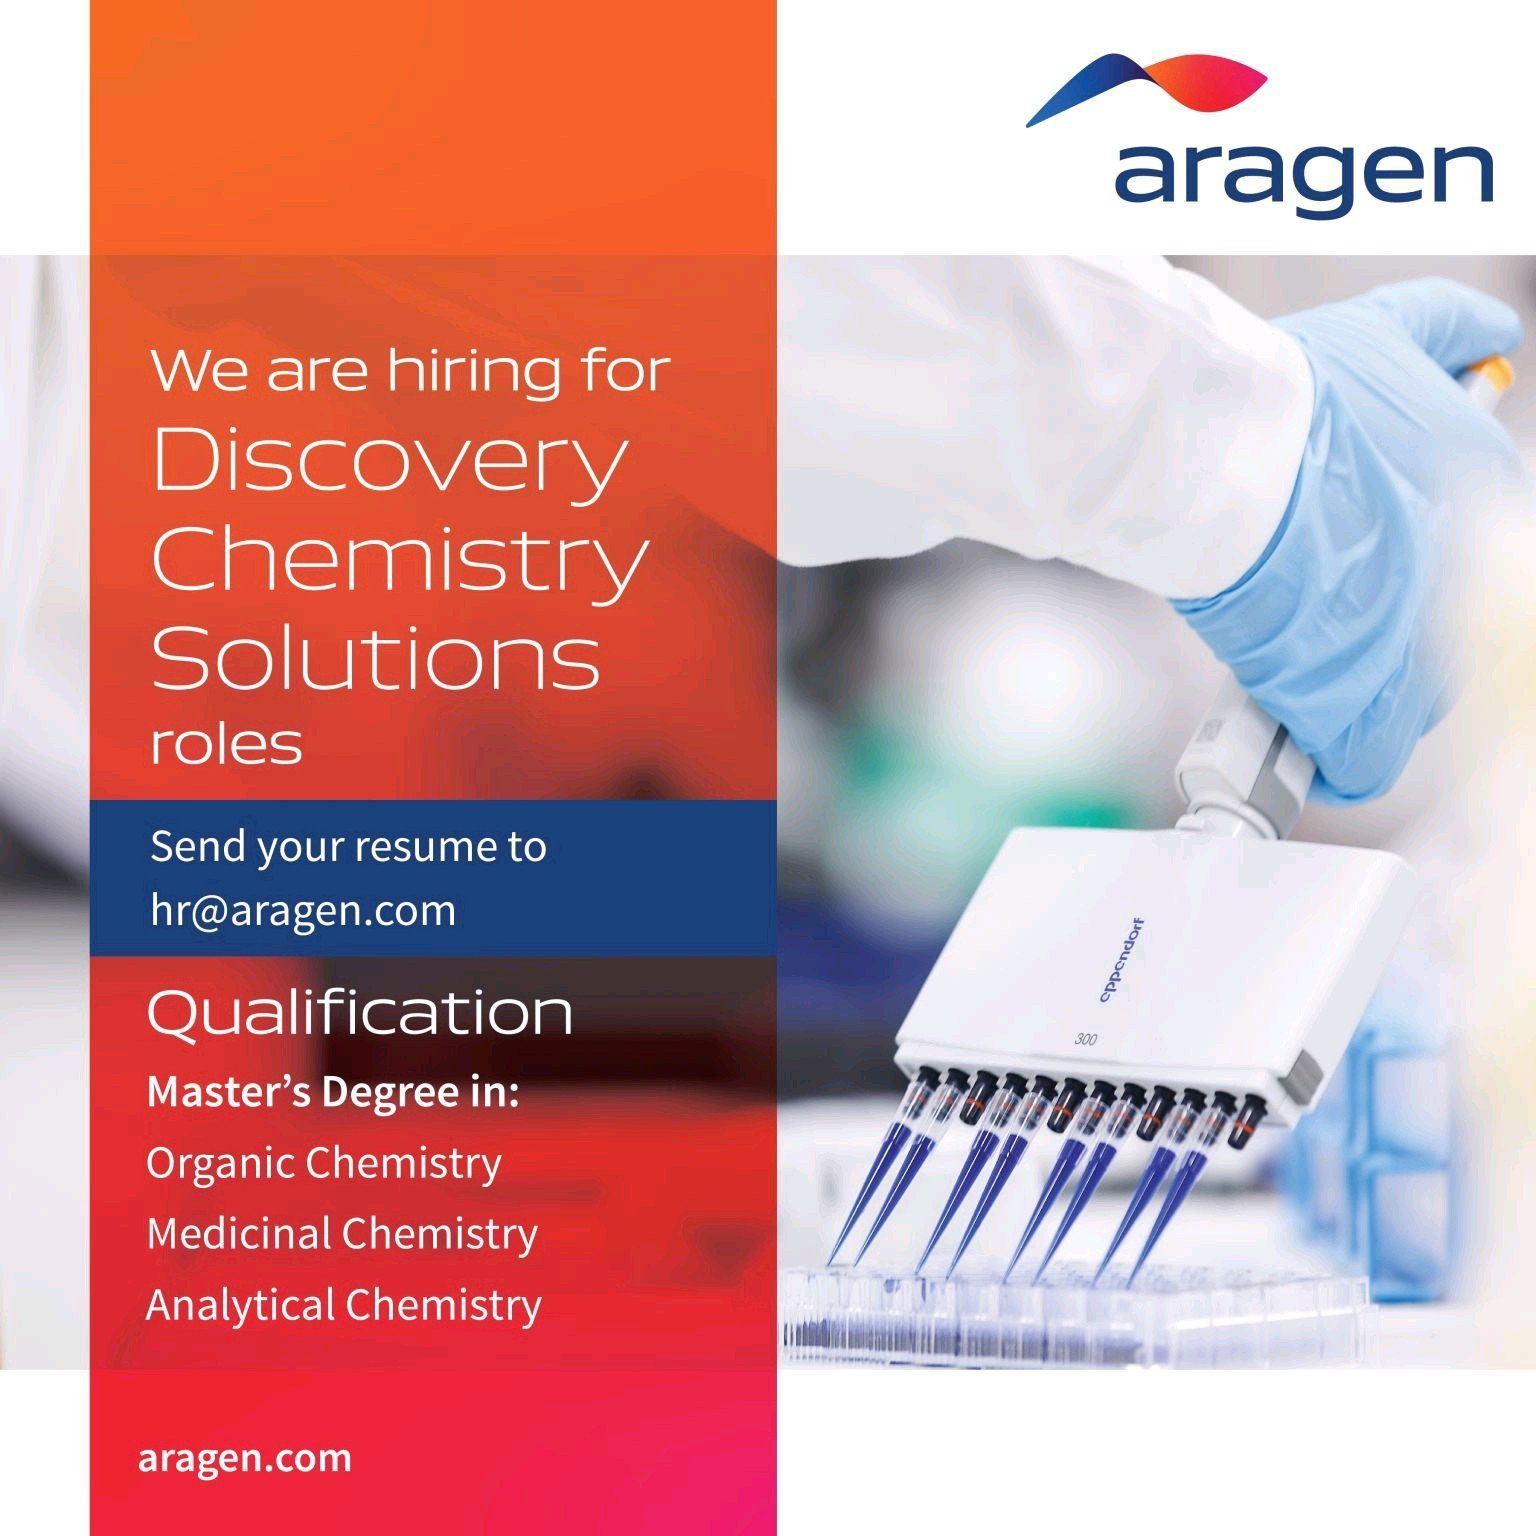 %titl aragen lifesciences looking for discovery chemistry solutions professionals